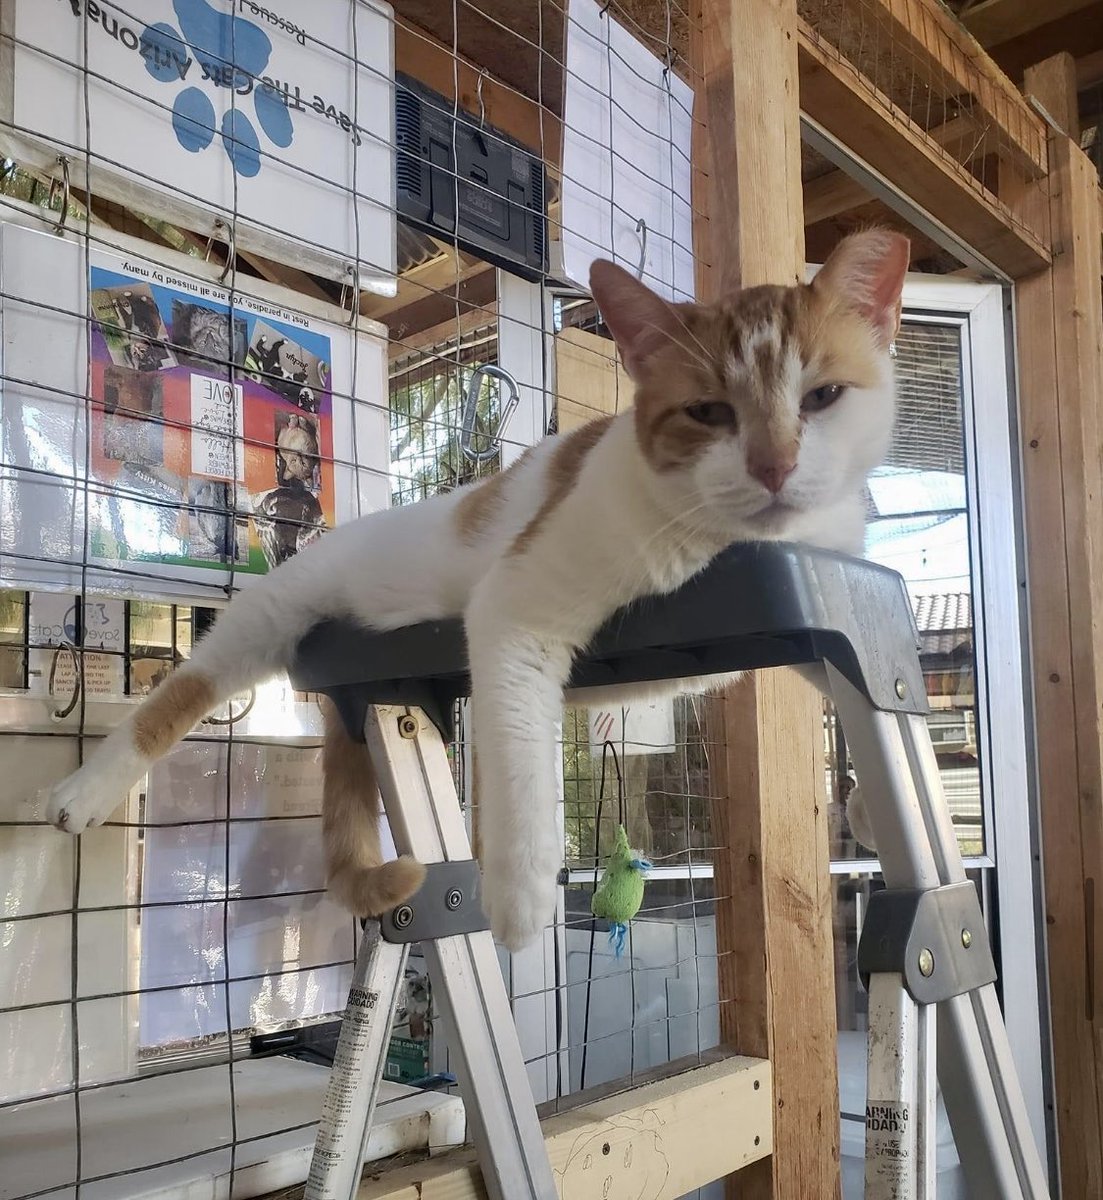 Sanctuary girl Emma- just hanging 🐾She and her colony members came to us after their outdoor feeder let us know they were in danger of being harmed. Safe & happy with dedicated volunteers, we love her! #Cats #FeralCats #StrayCats #Rescue #TNR #Volunteer